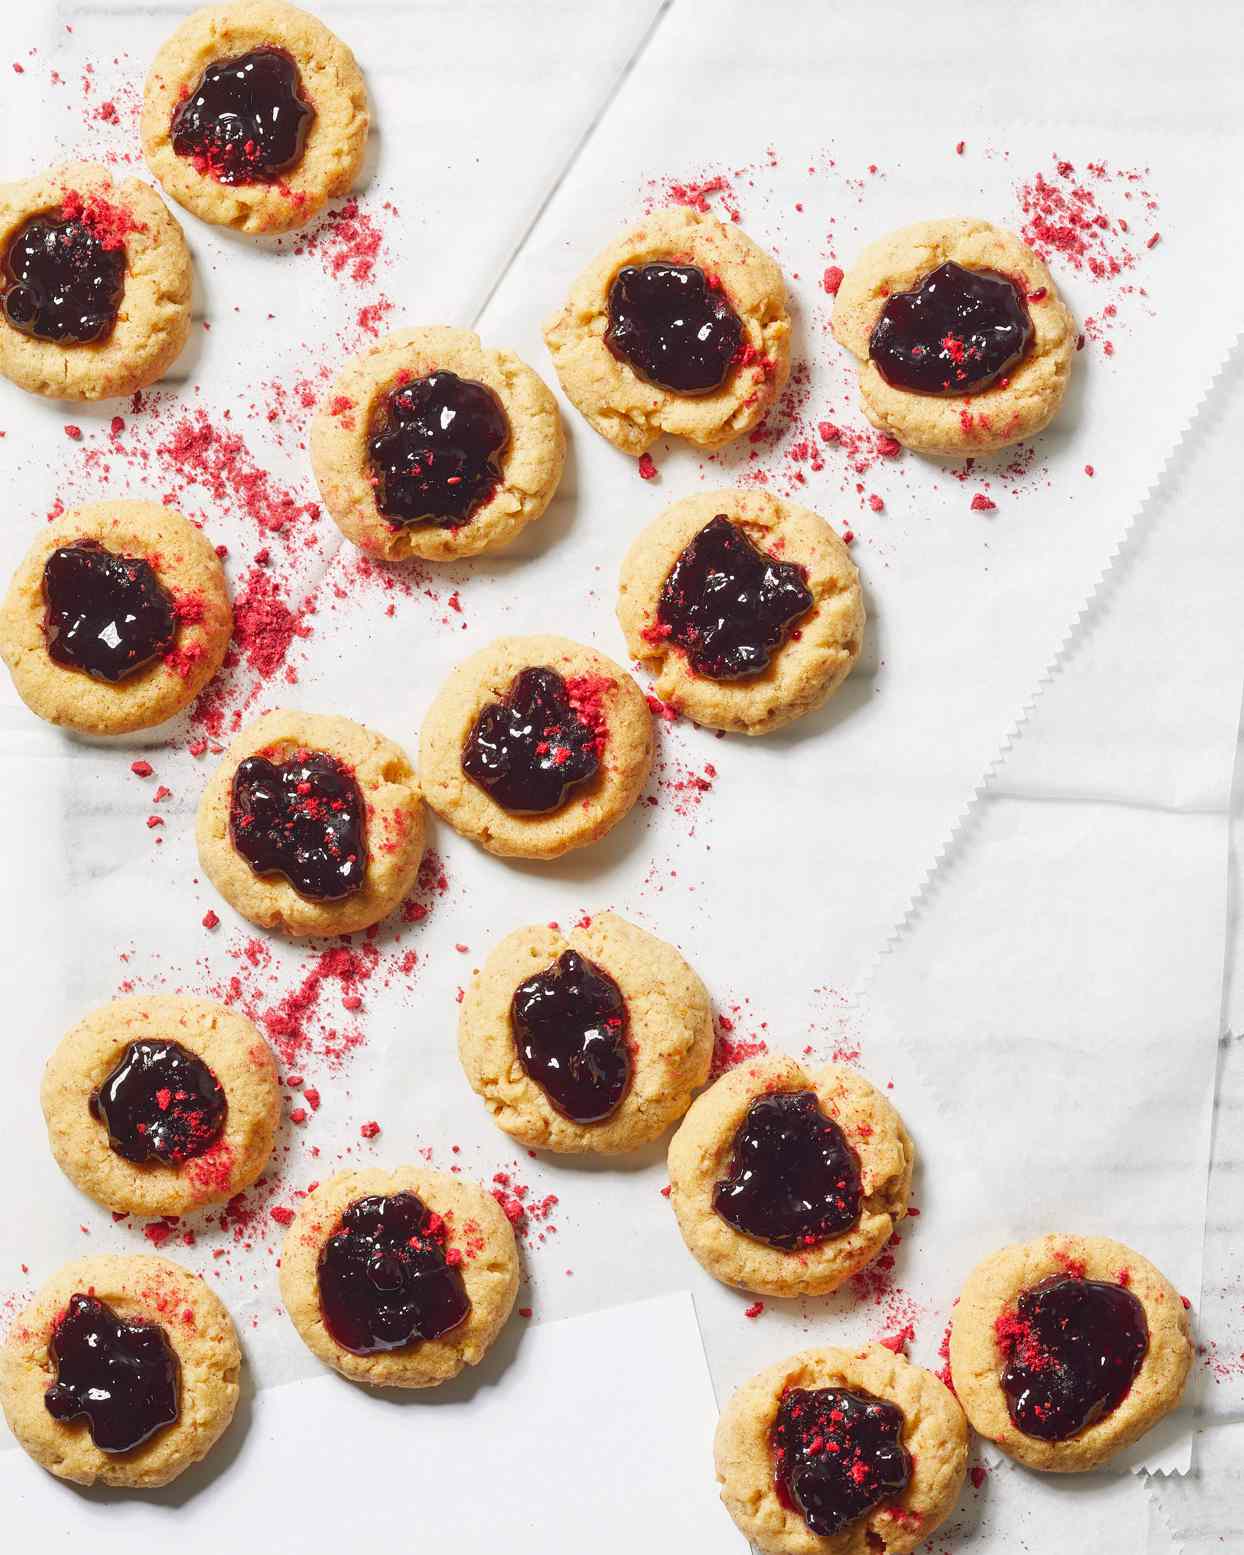 Huckleberry Jam Thumbprint Cookies dusted with crushed freeze-dried raspberries